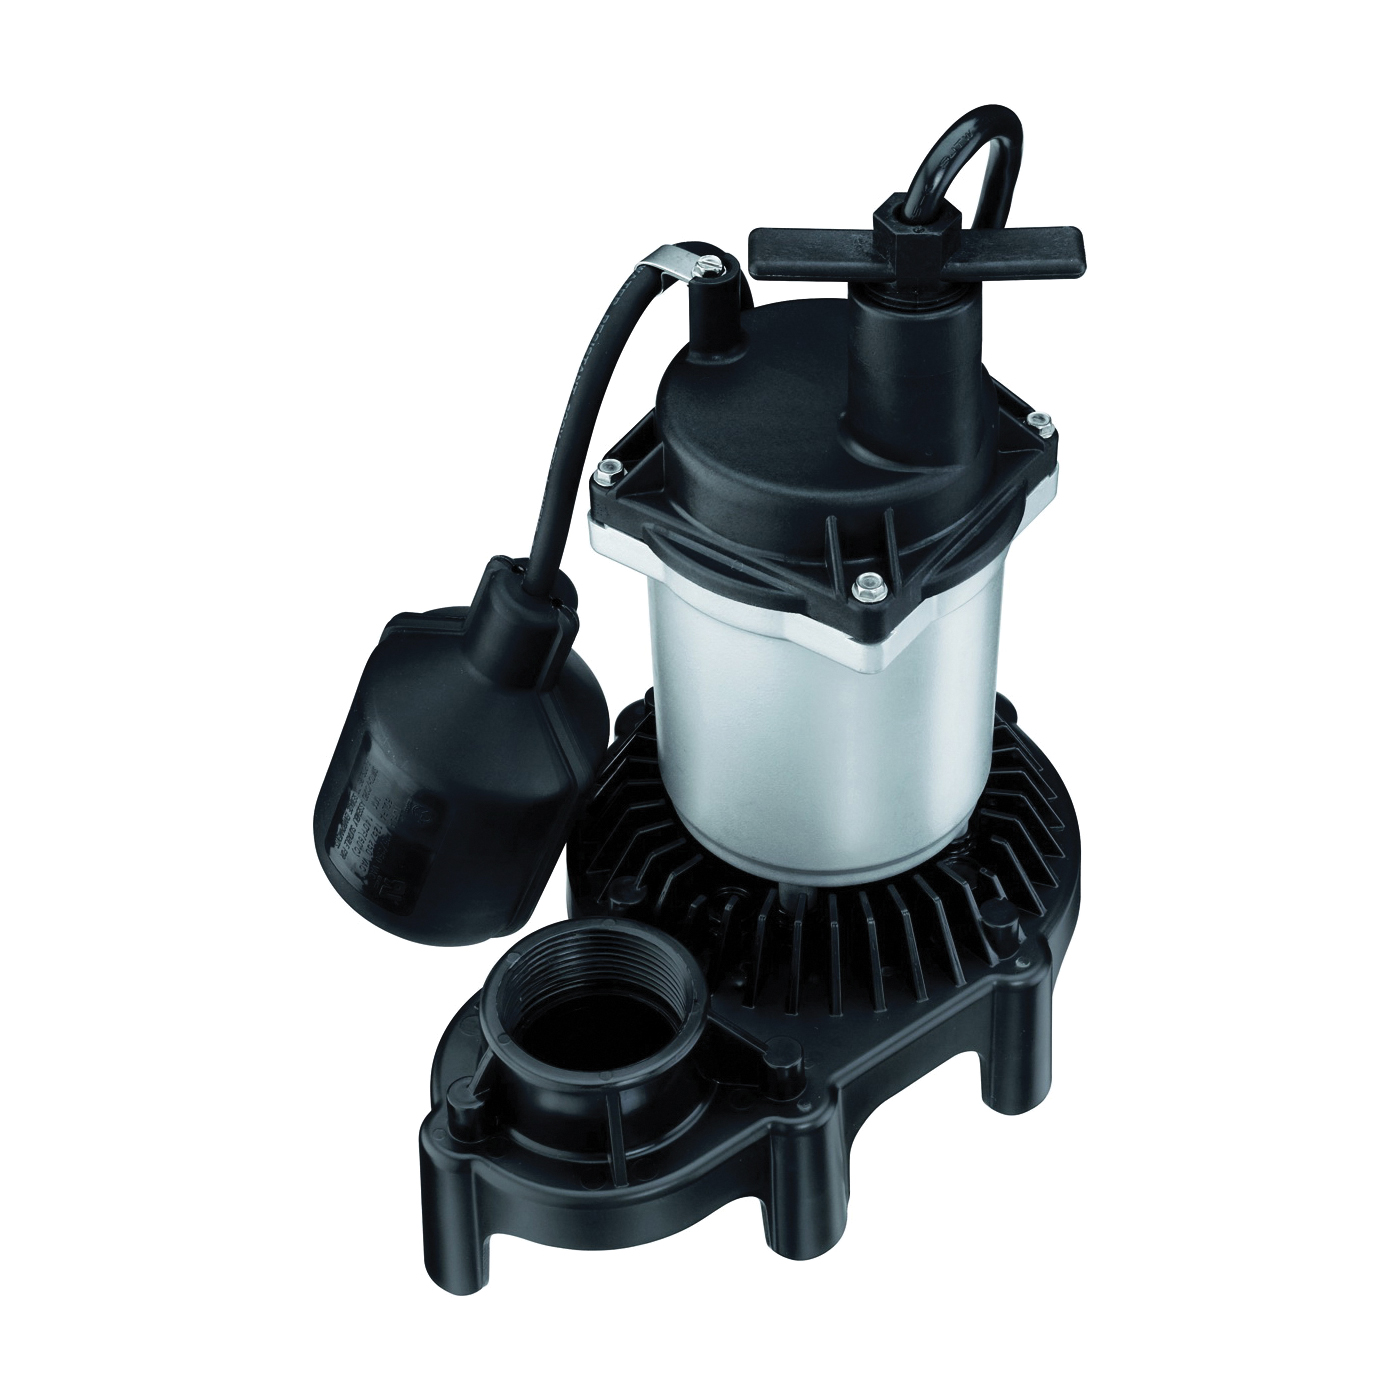 2163 Sump Pump, 1-Phase, 3.9 A, 115 V, 0.33 hp, 1-1/2 in Outlet, 22 ft Max Head, 660 gph, Thermoplastic